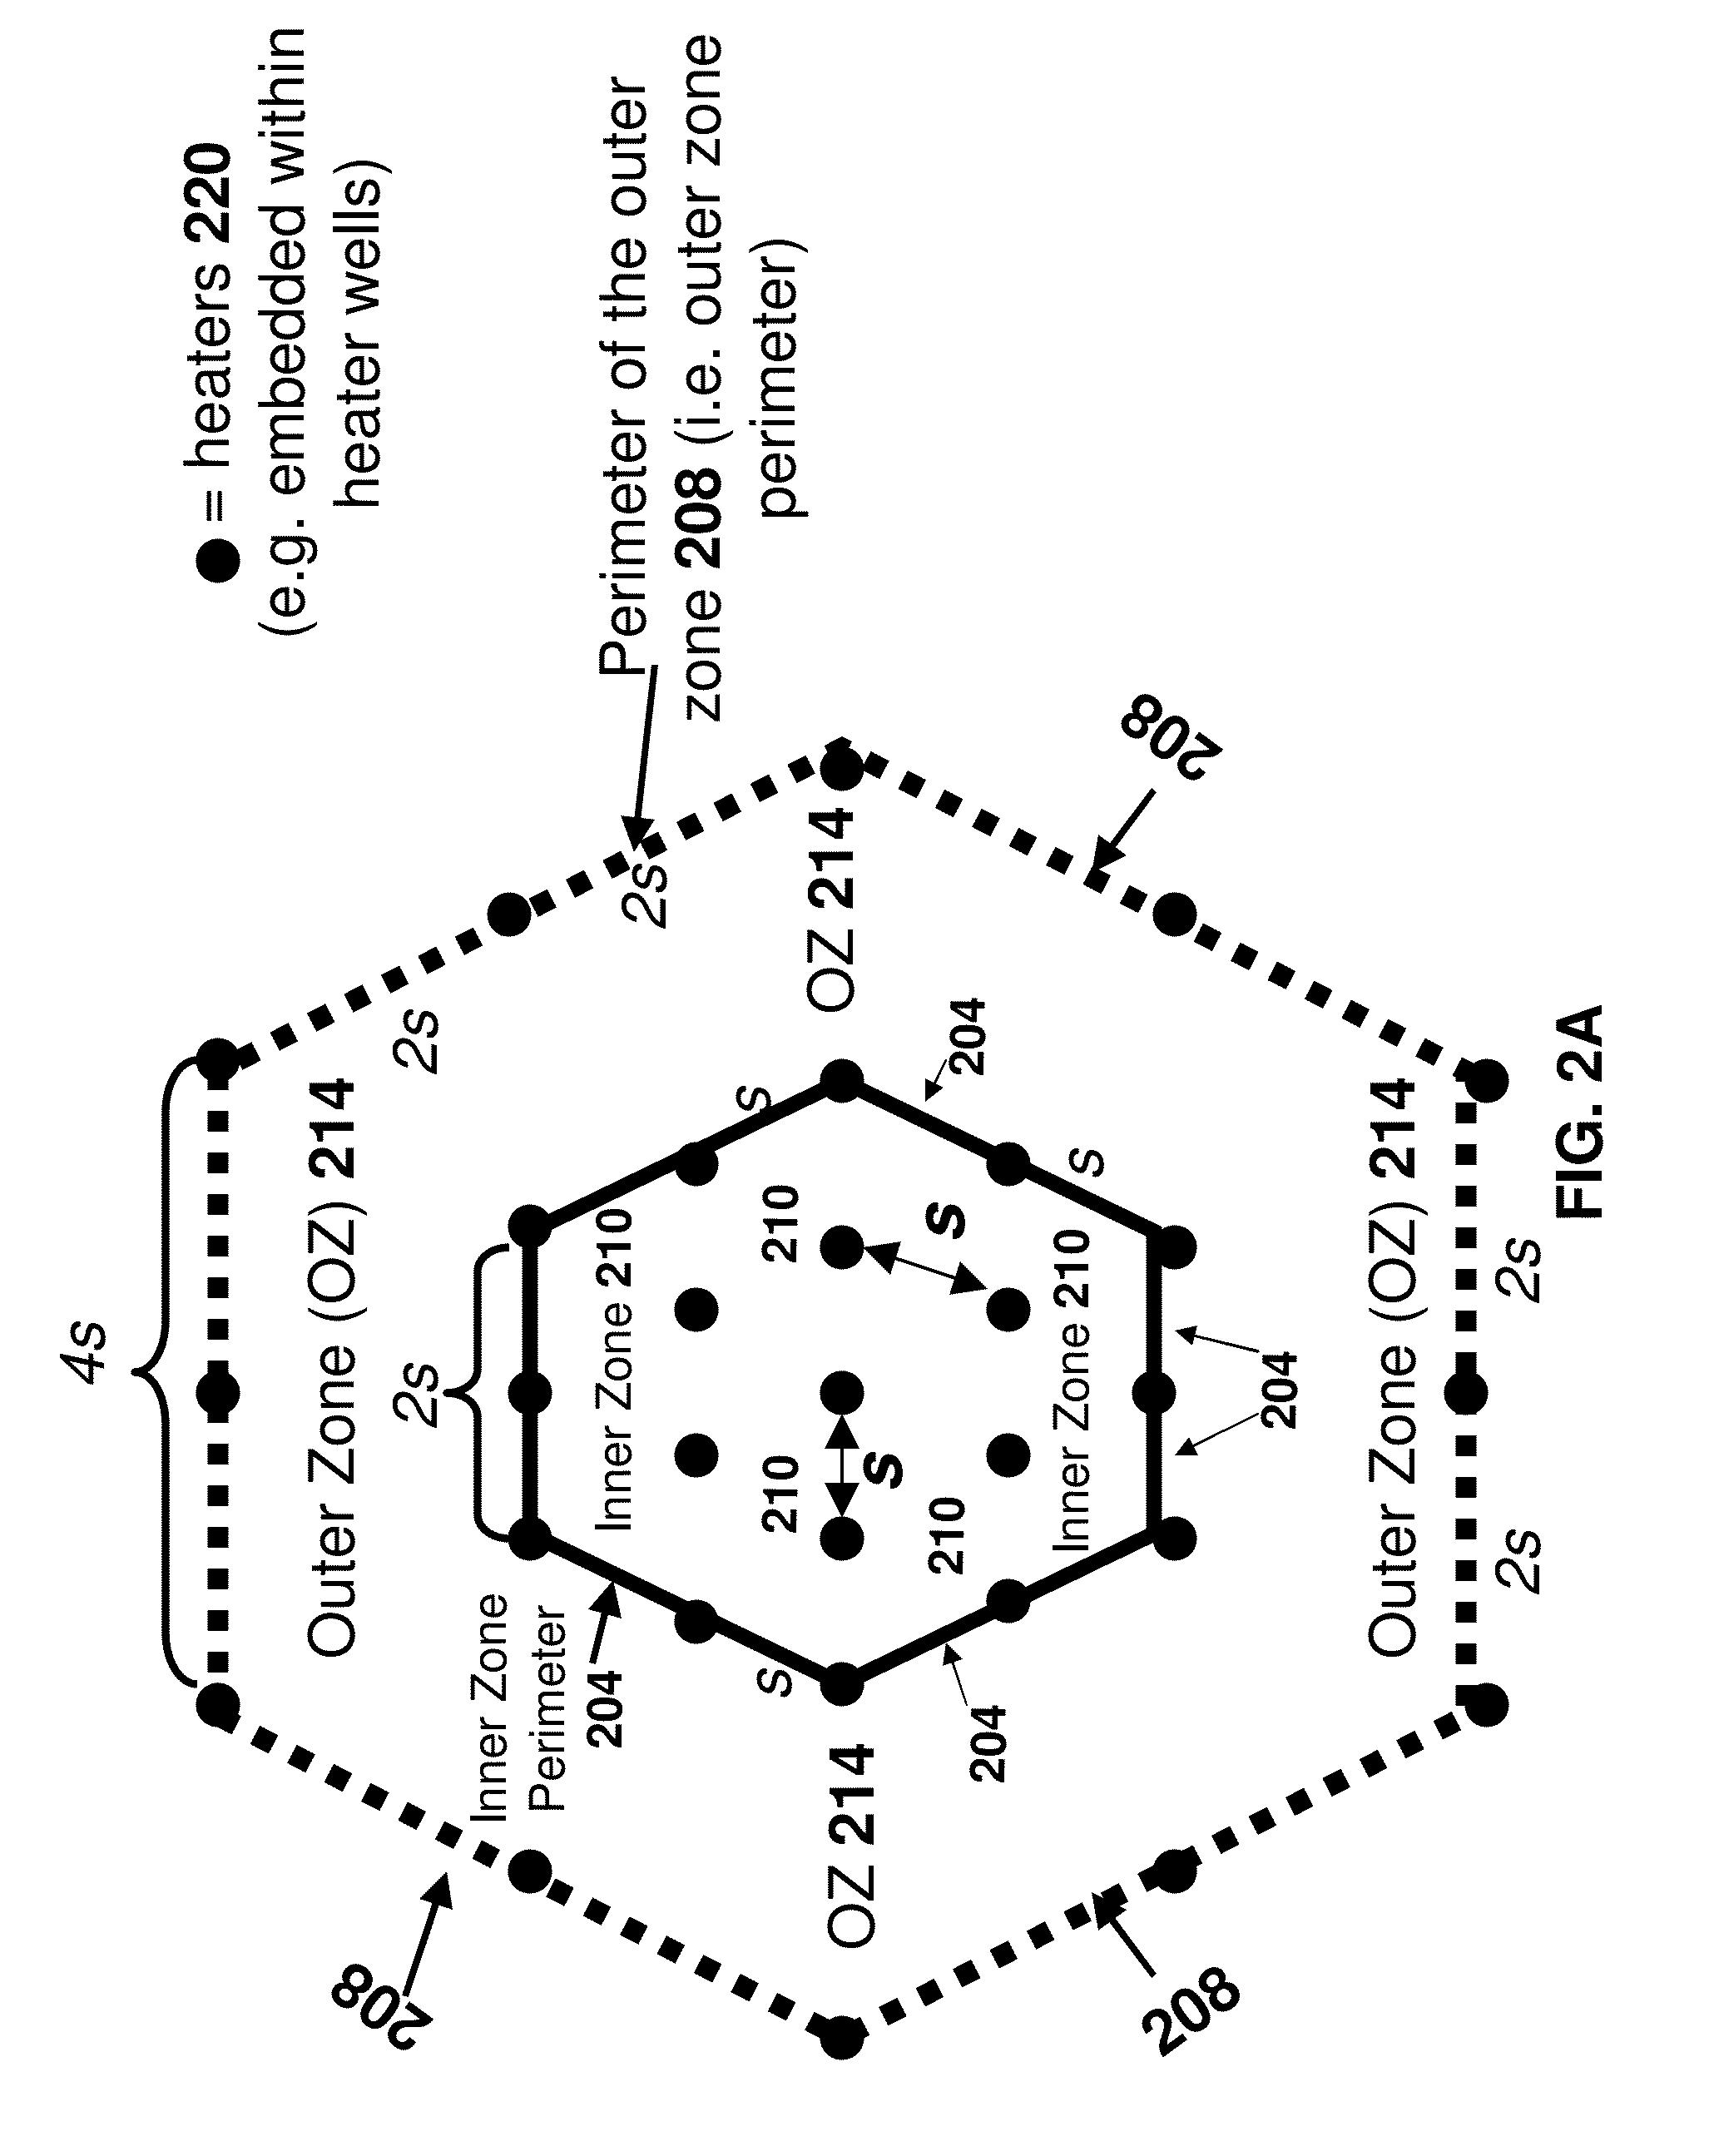 Heater pattern including heaters powered by wind-electricity for in situ thermal processing of a subsurface hydrocarbon-containing formation